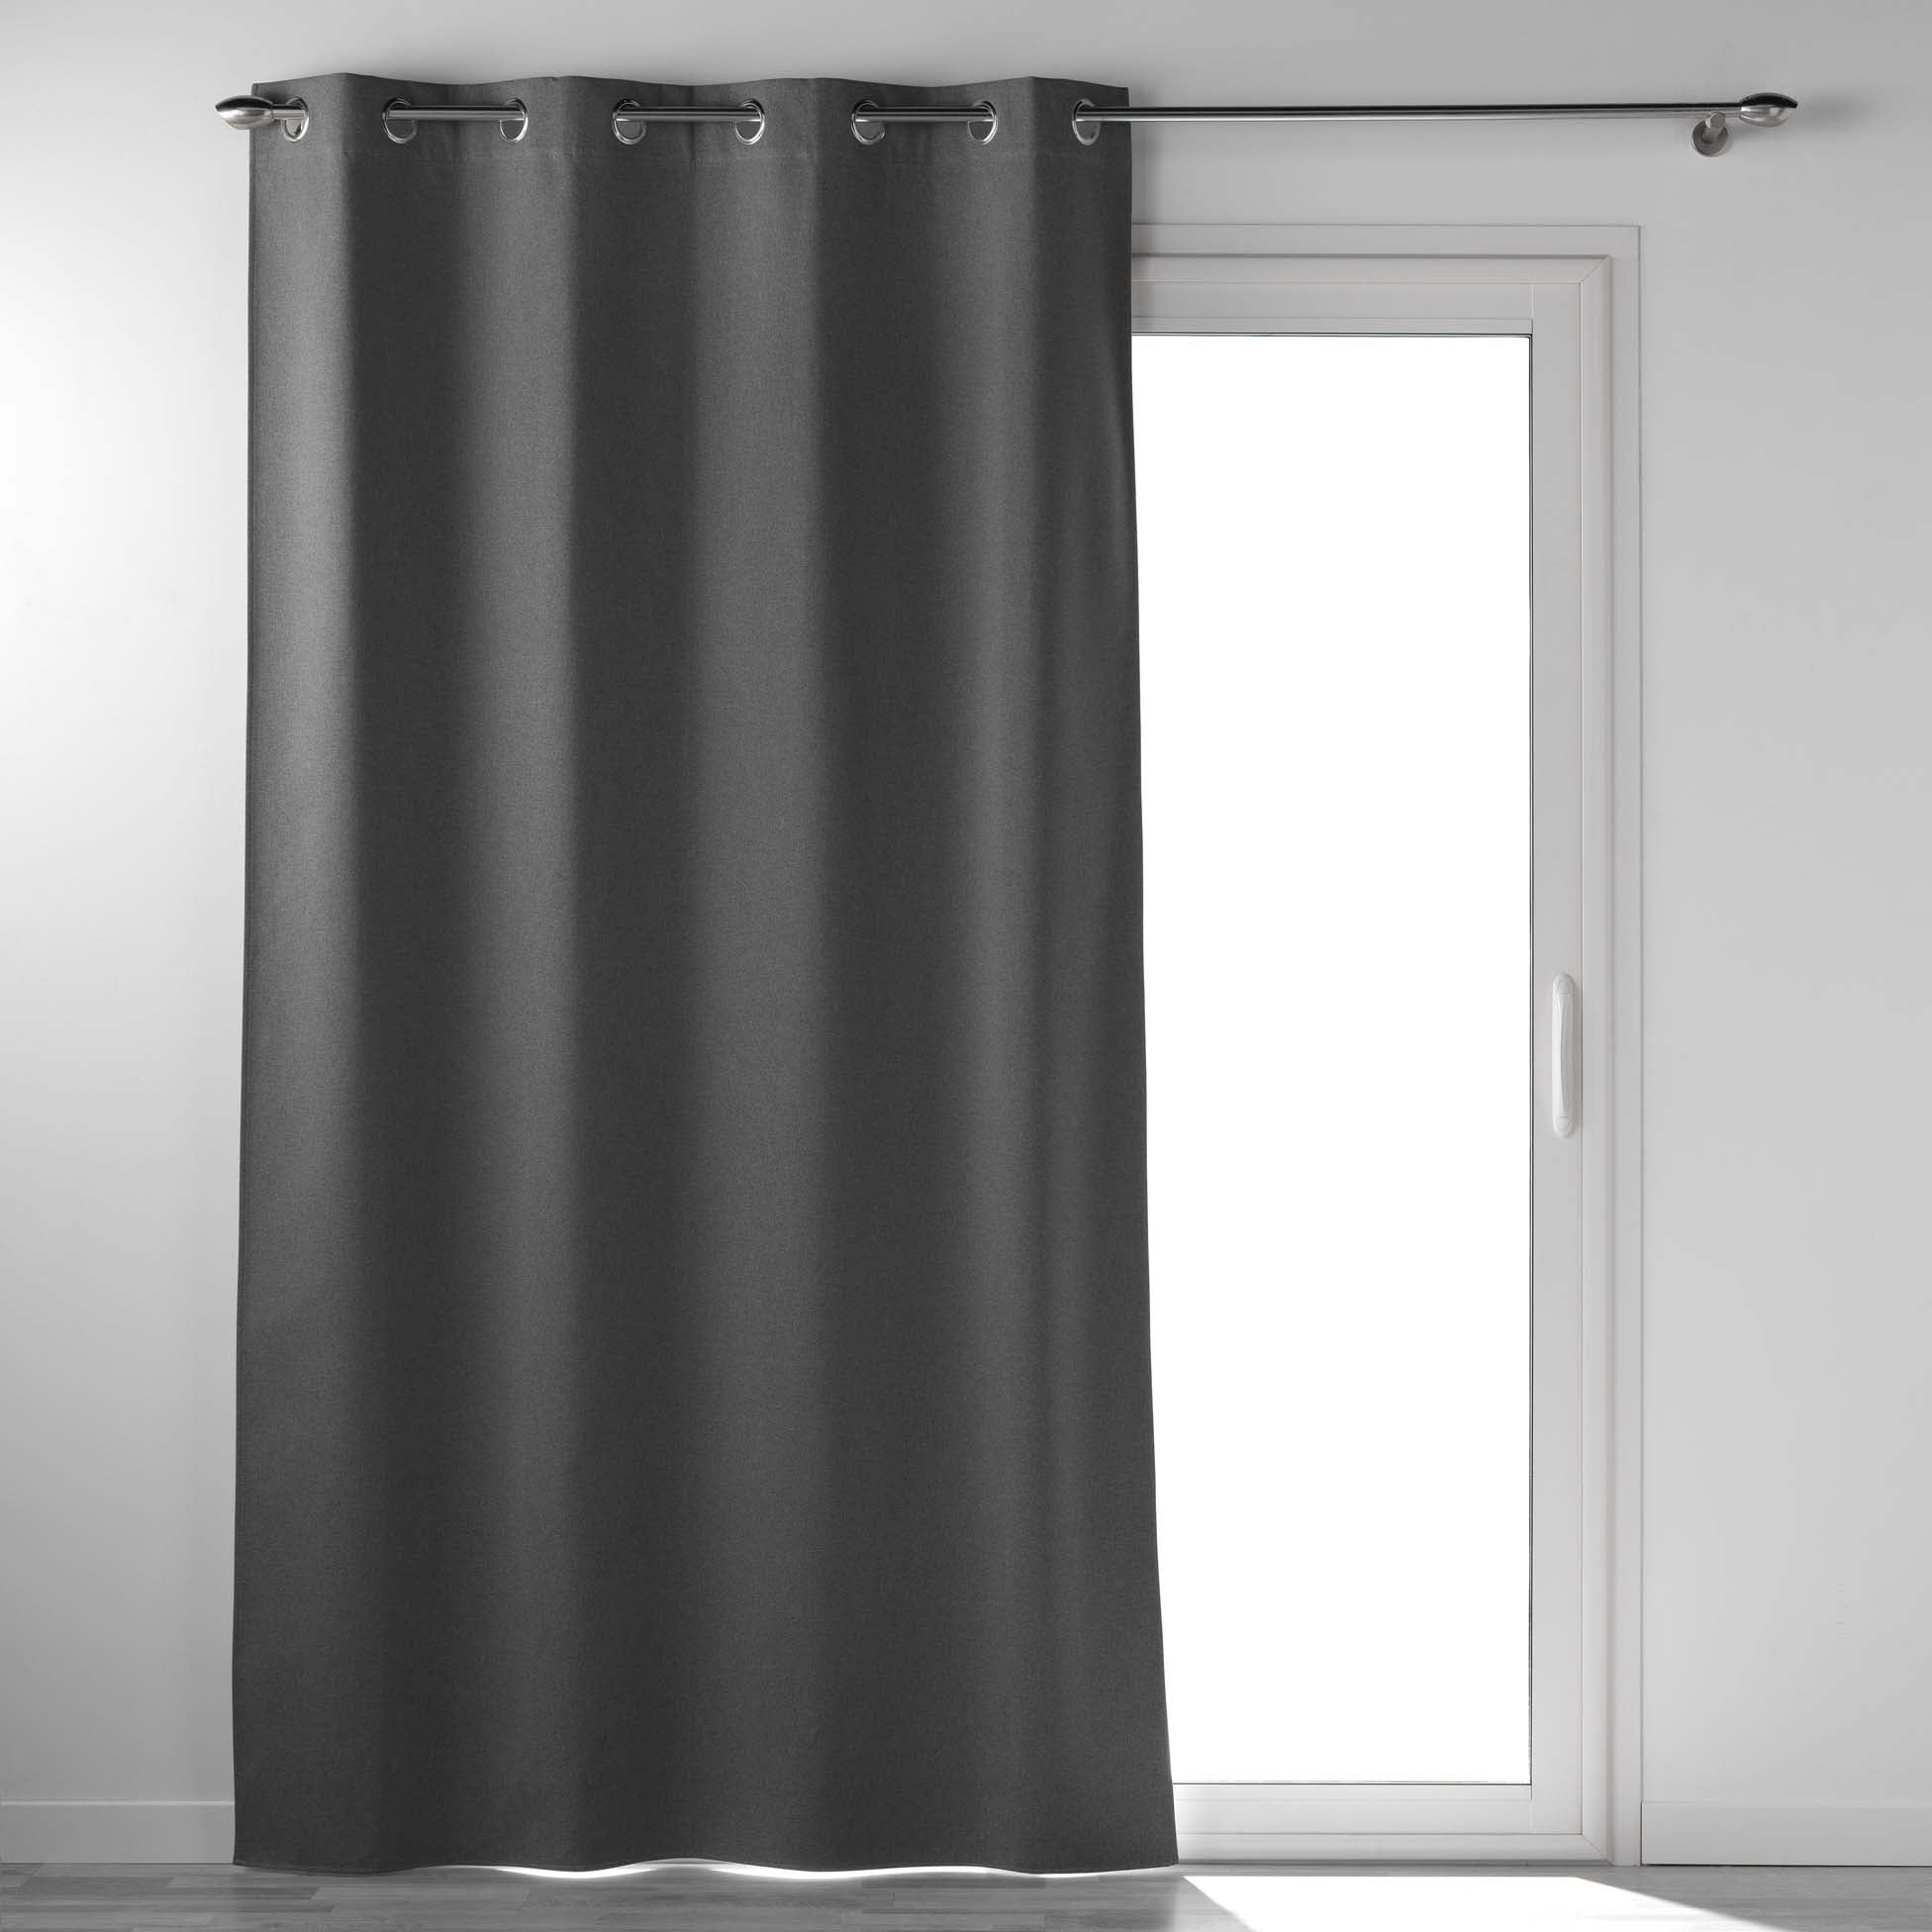 Draperie Blackout Occultiss Antracit, 135 x 260 cm